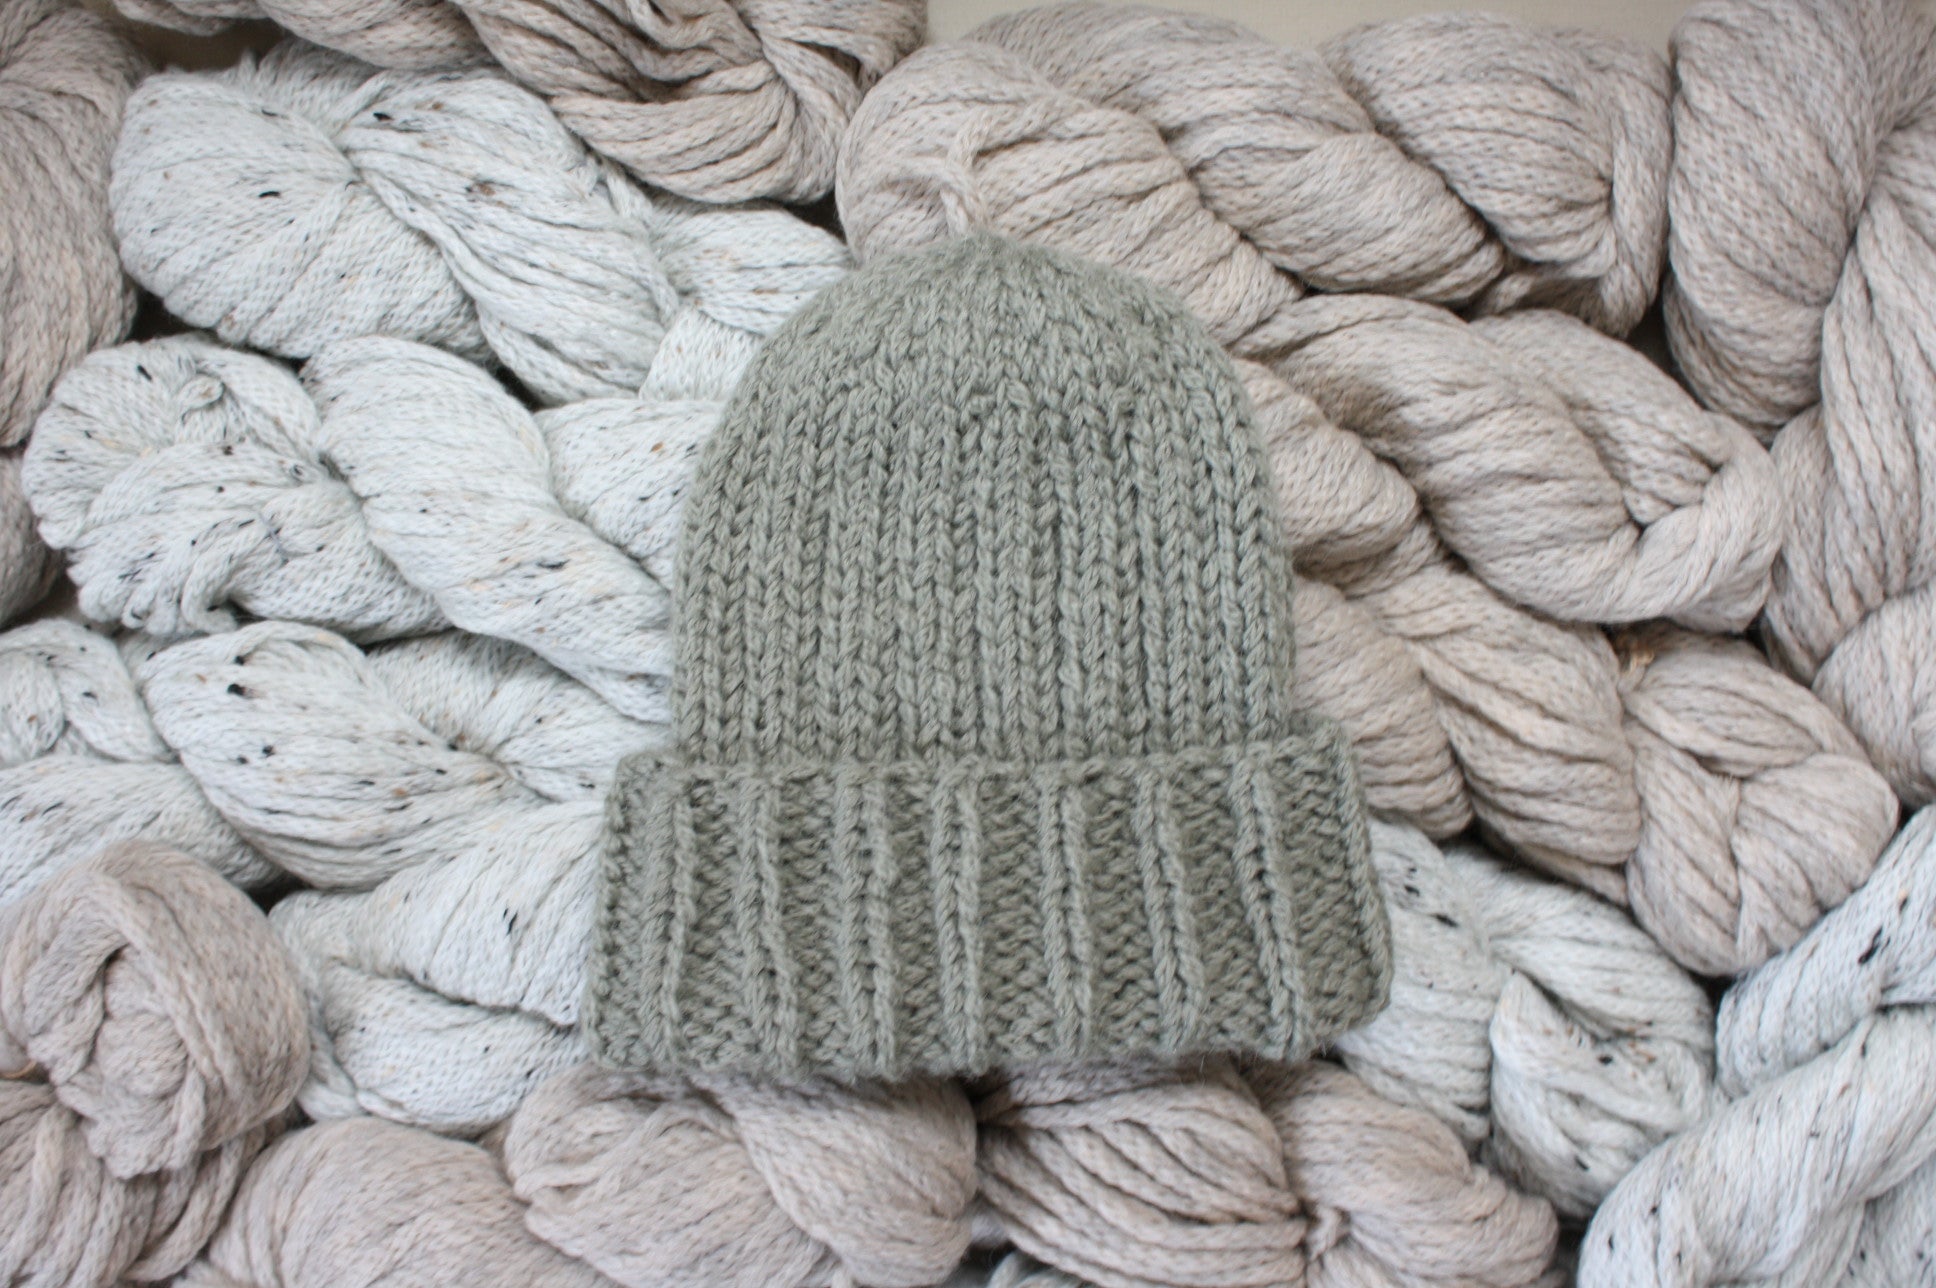 Quarry Toque, Hand Knit in Alpaca Merino Wool, soft and lightweight fall accessory